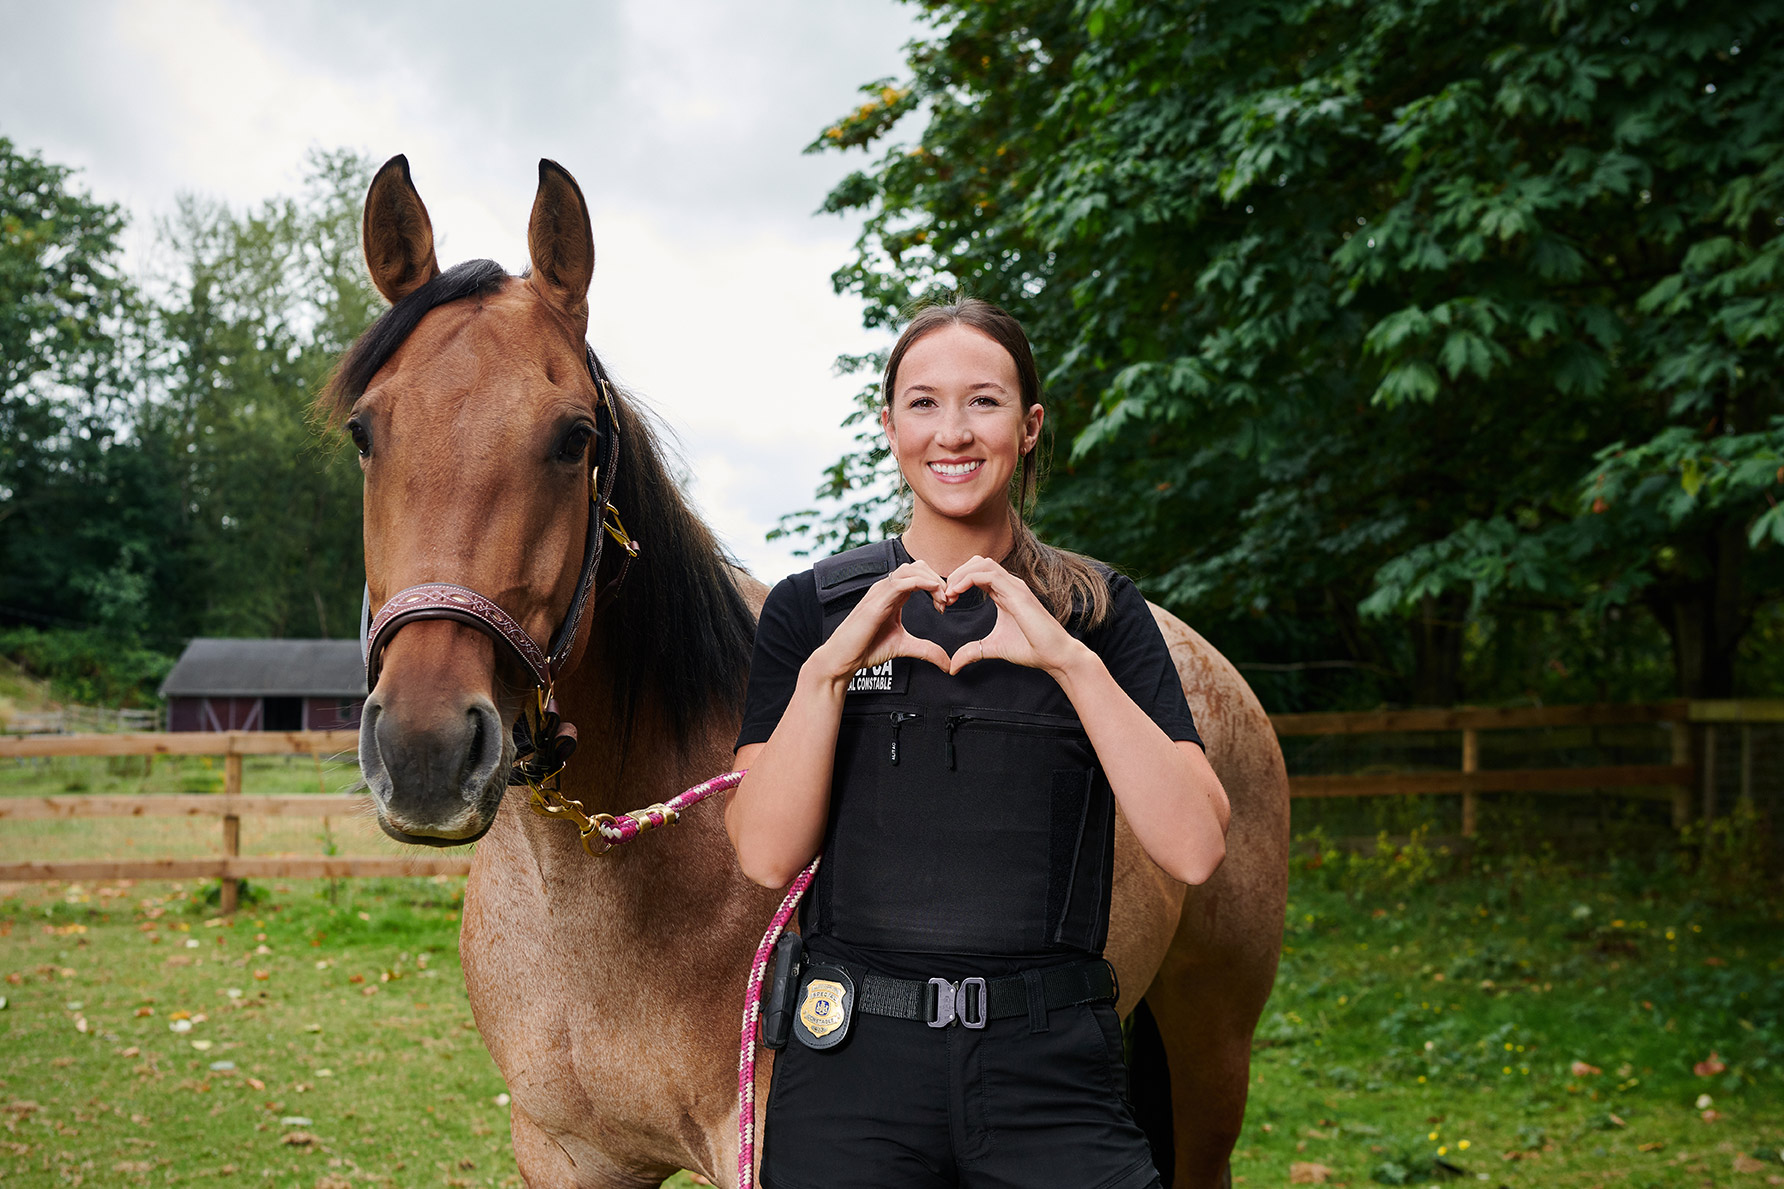 2020-Vancouver-HumansOfSupport-Photographer-ErichSaide-PassionProject-Globalmovement-COVID-19-Portrait-HumansOfSupport-FrontlineHero-HOS-SPCA-CristieSteele-Horse-hearthands